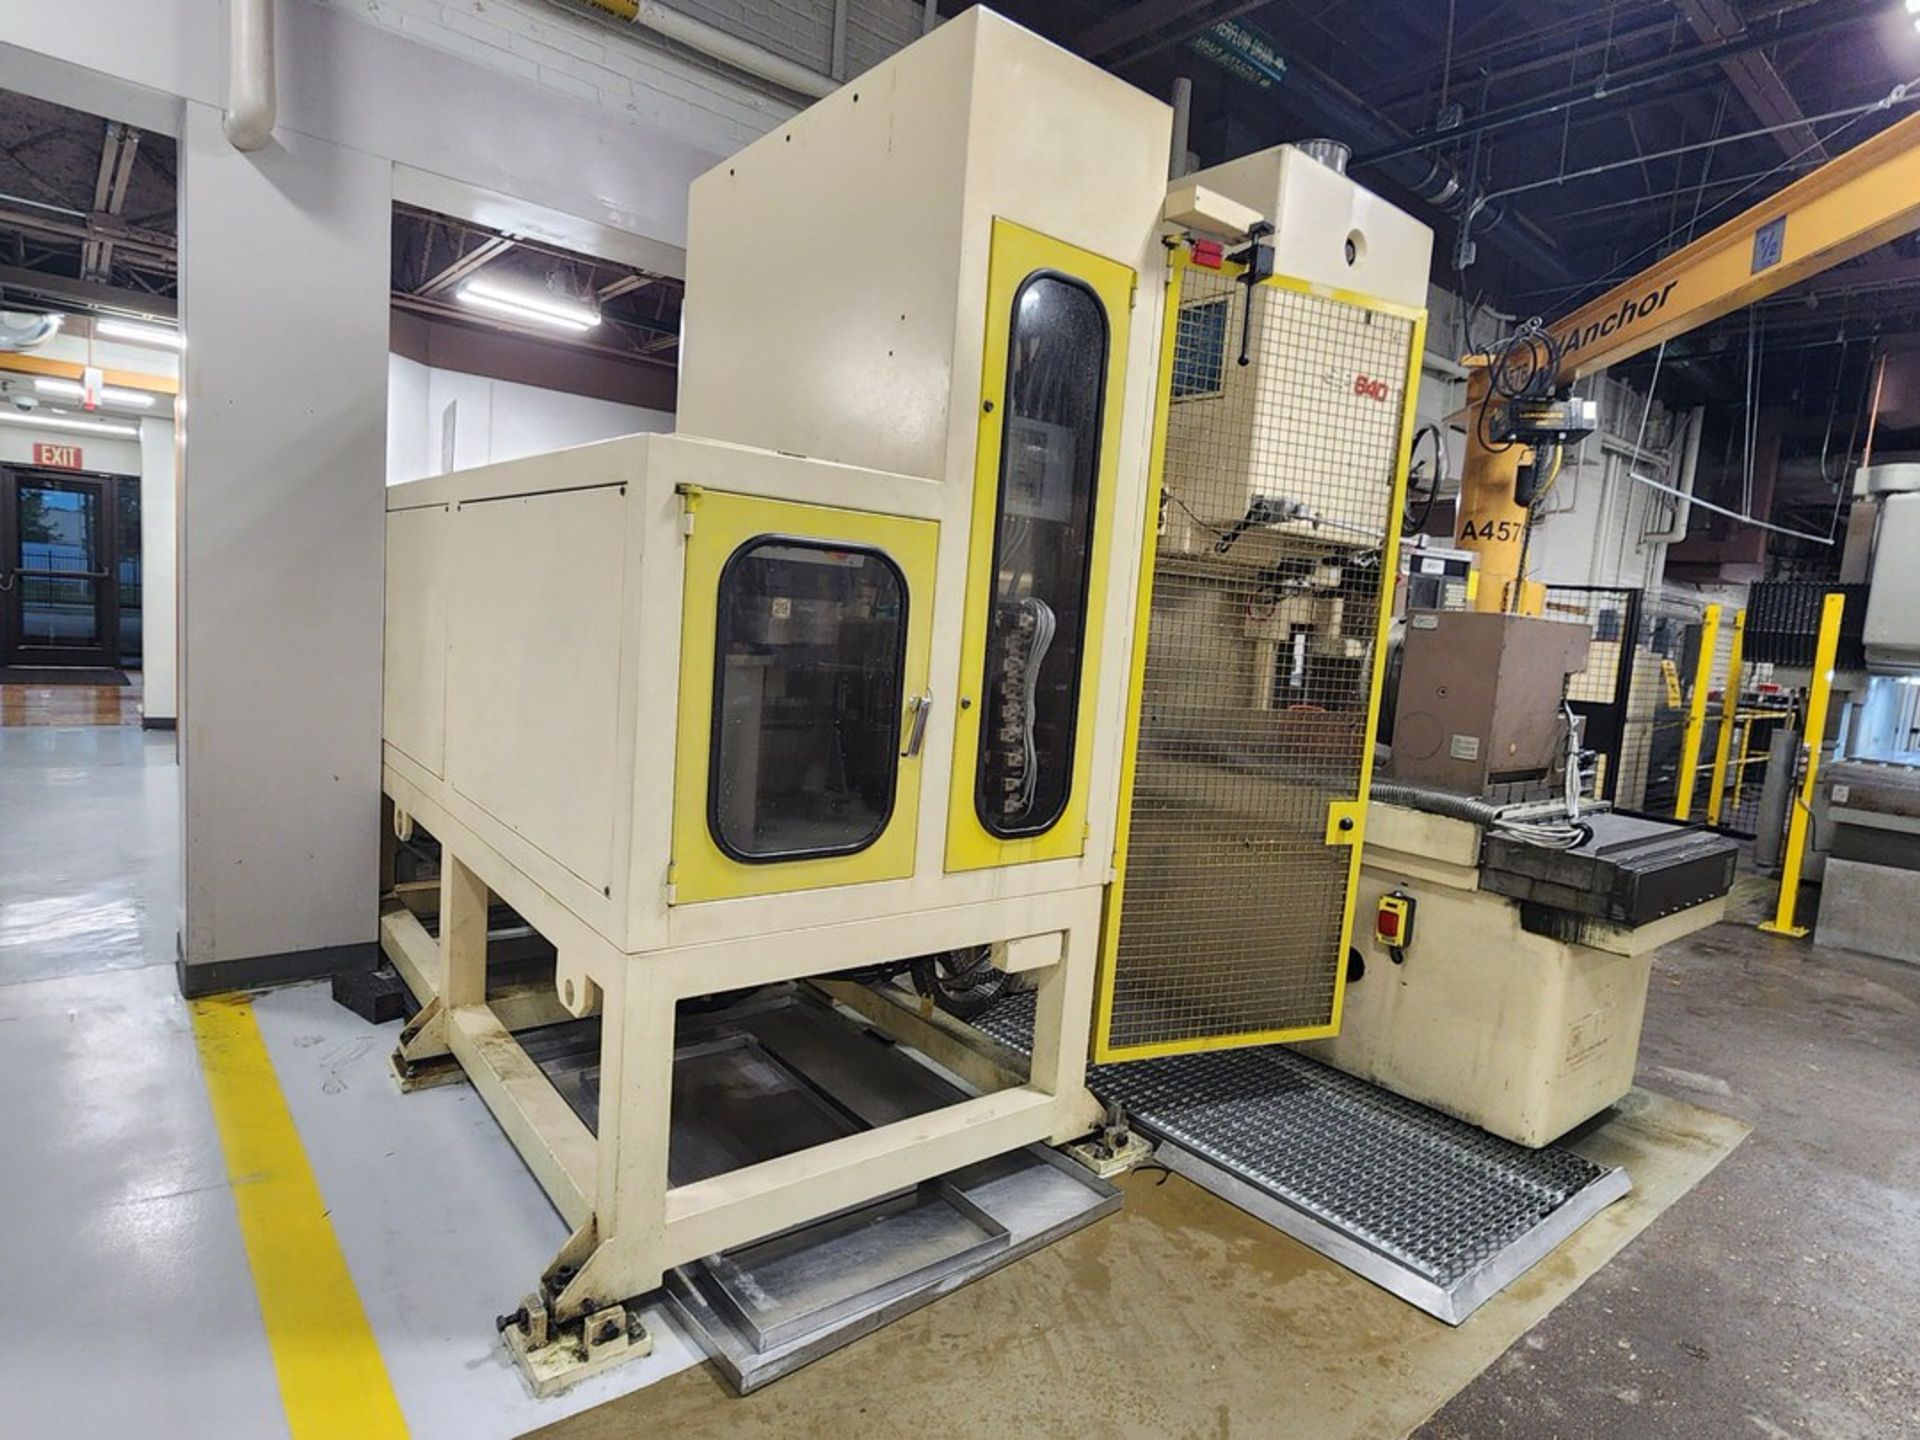 SIP SIP-640 Jig Boring Machine W/ Fanuc Series 16i-M Controller; Cutting Time: 15,304hrs - Image 3 of 36